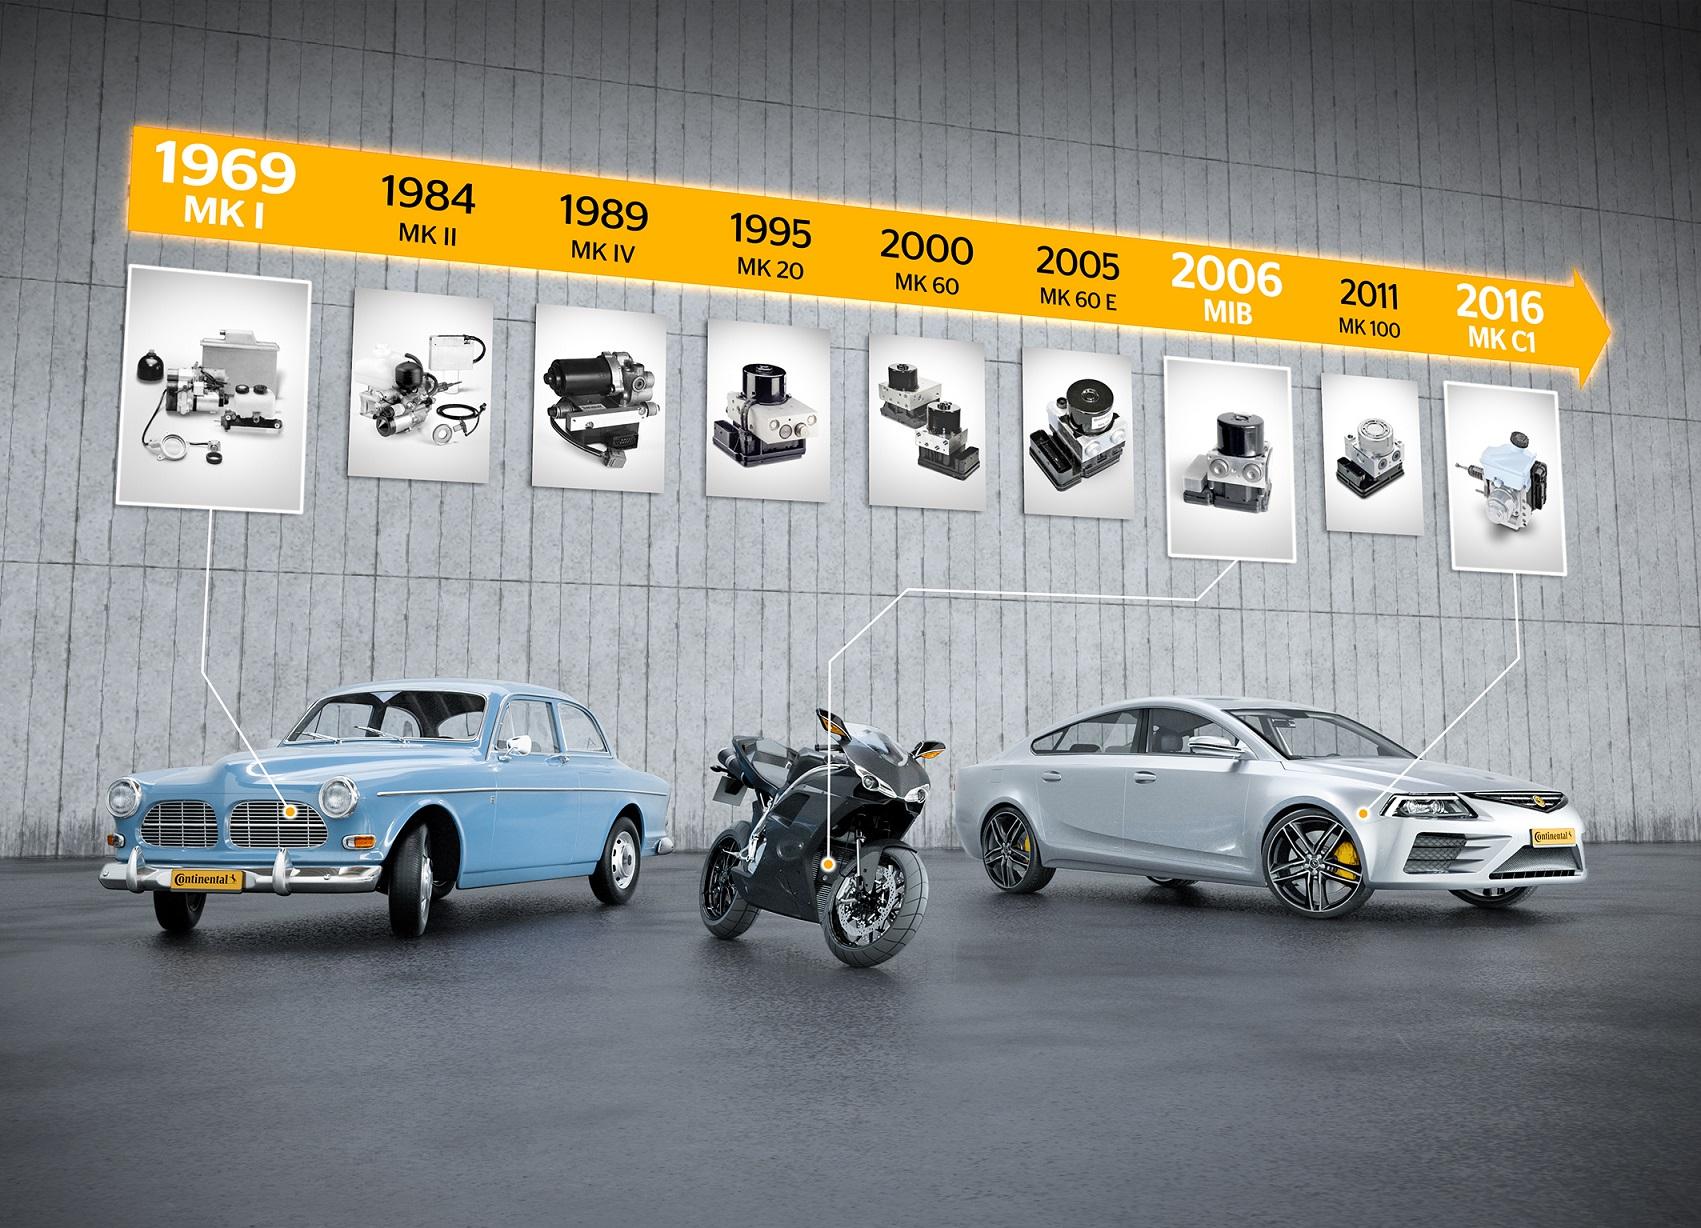 The Continental ABS history shows the different brake systems